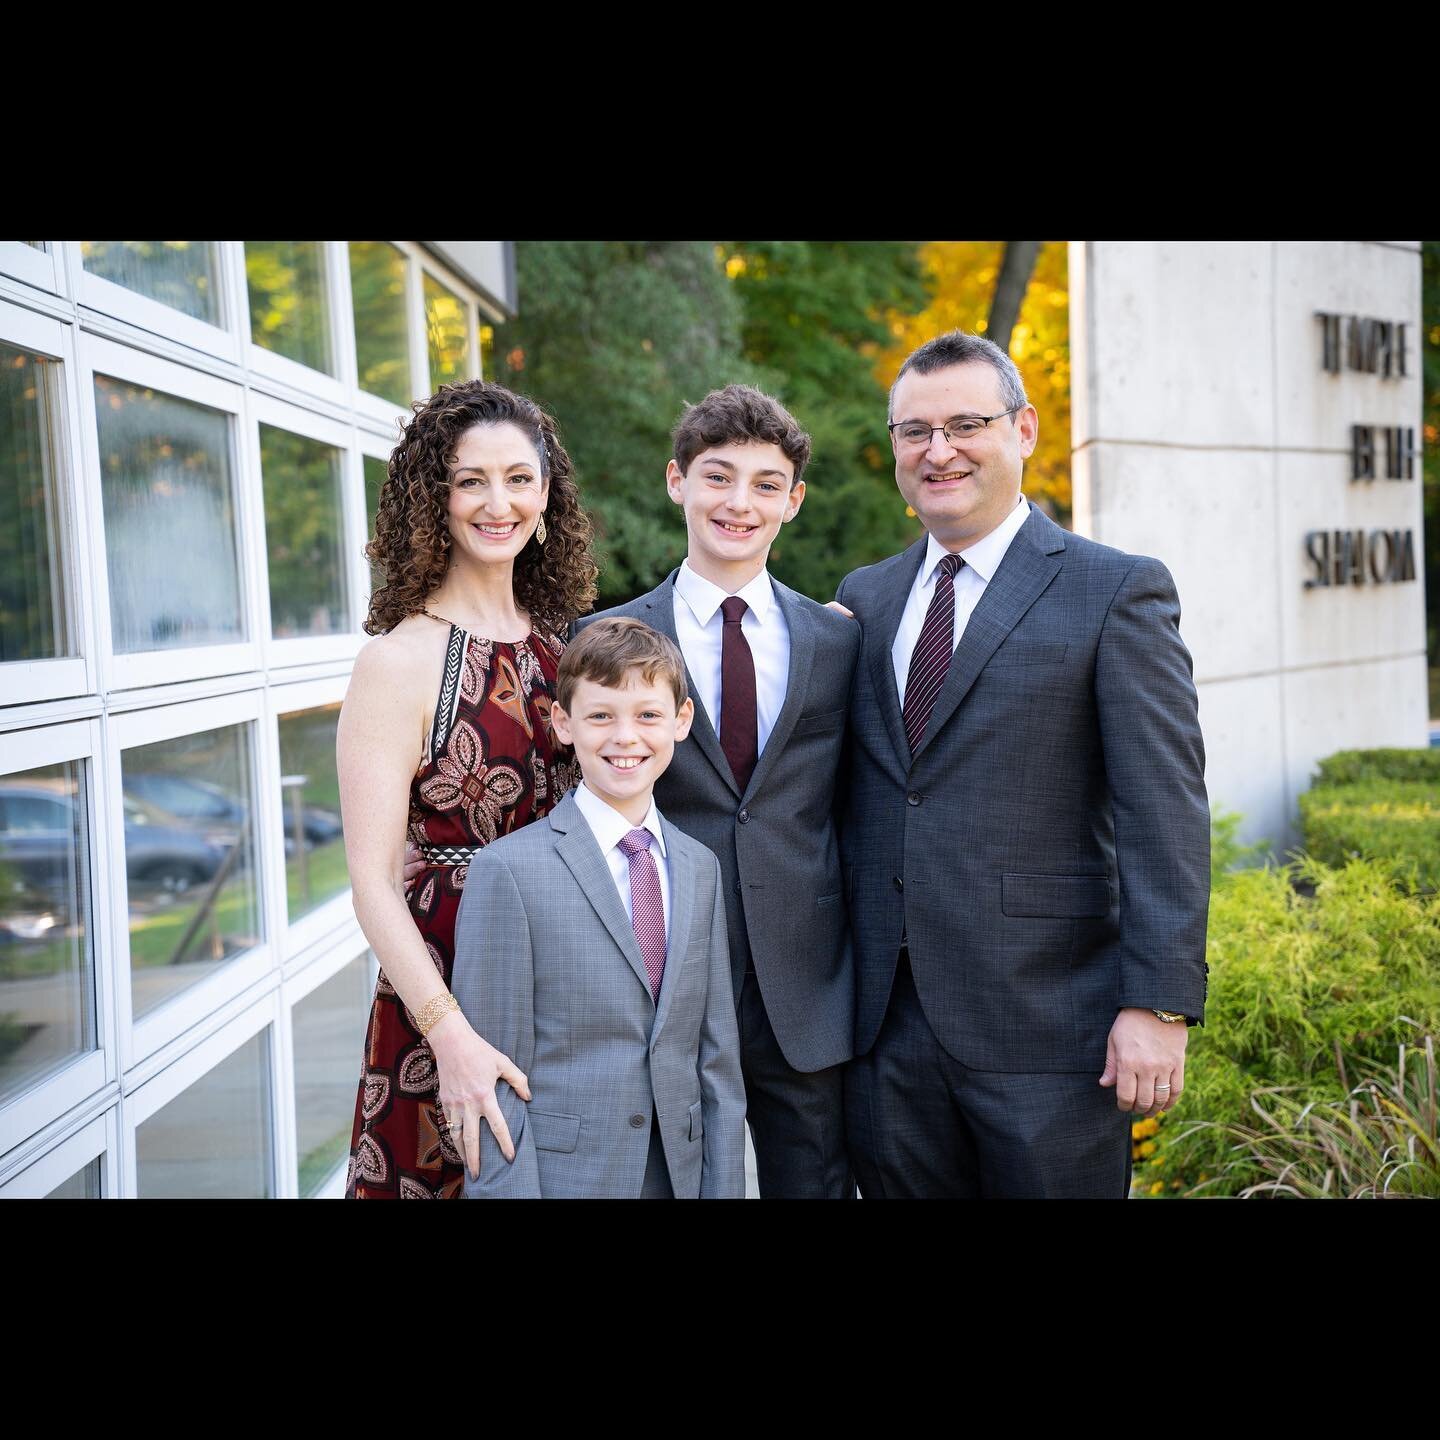 So much joy! 🙏🏻+ 💕@alighnwithjen for having me capture this amazing day for her family&hellip; #feelingblessed
.
.
.
#barmitzvah #becomingaman #mitzvahmarket #mazeltov #mitzvahphotographer #eventphotography #familyphotography  #familyportrait #wes